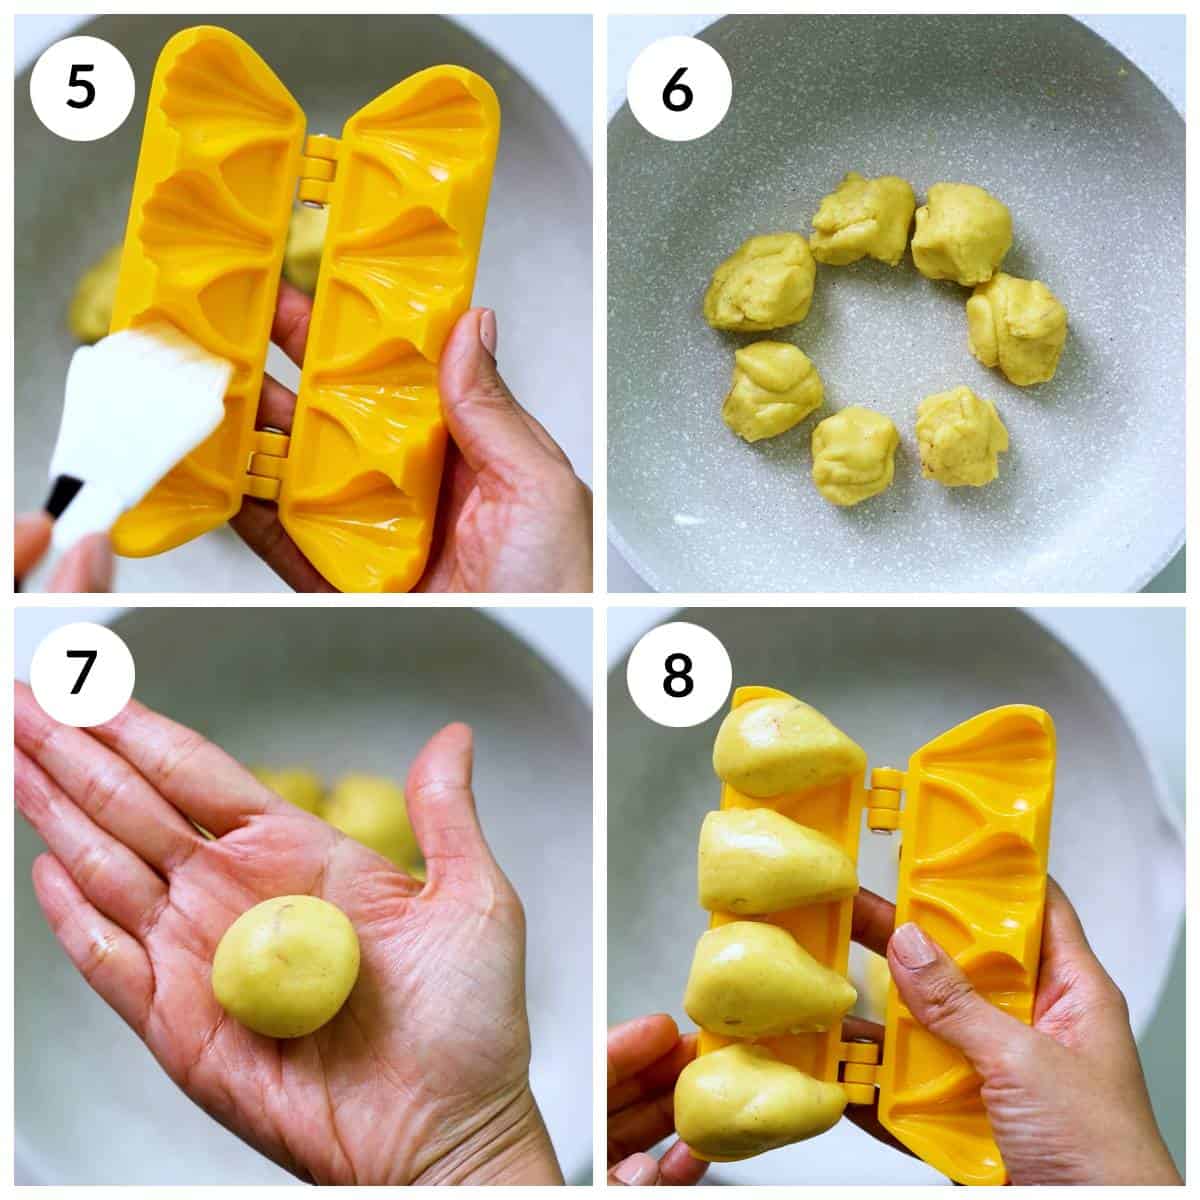 Steps for prepping for Mawa Modak shaping